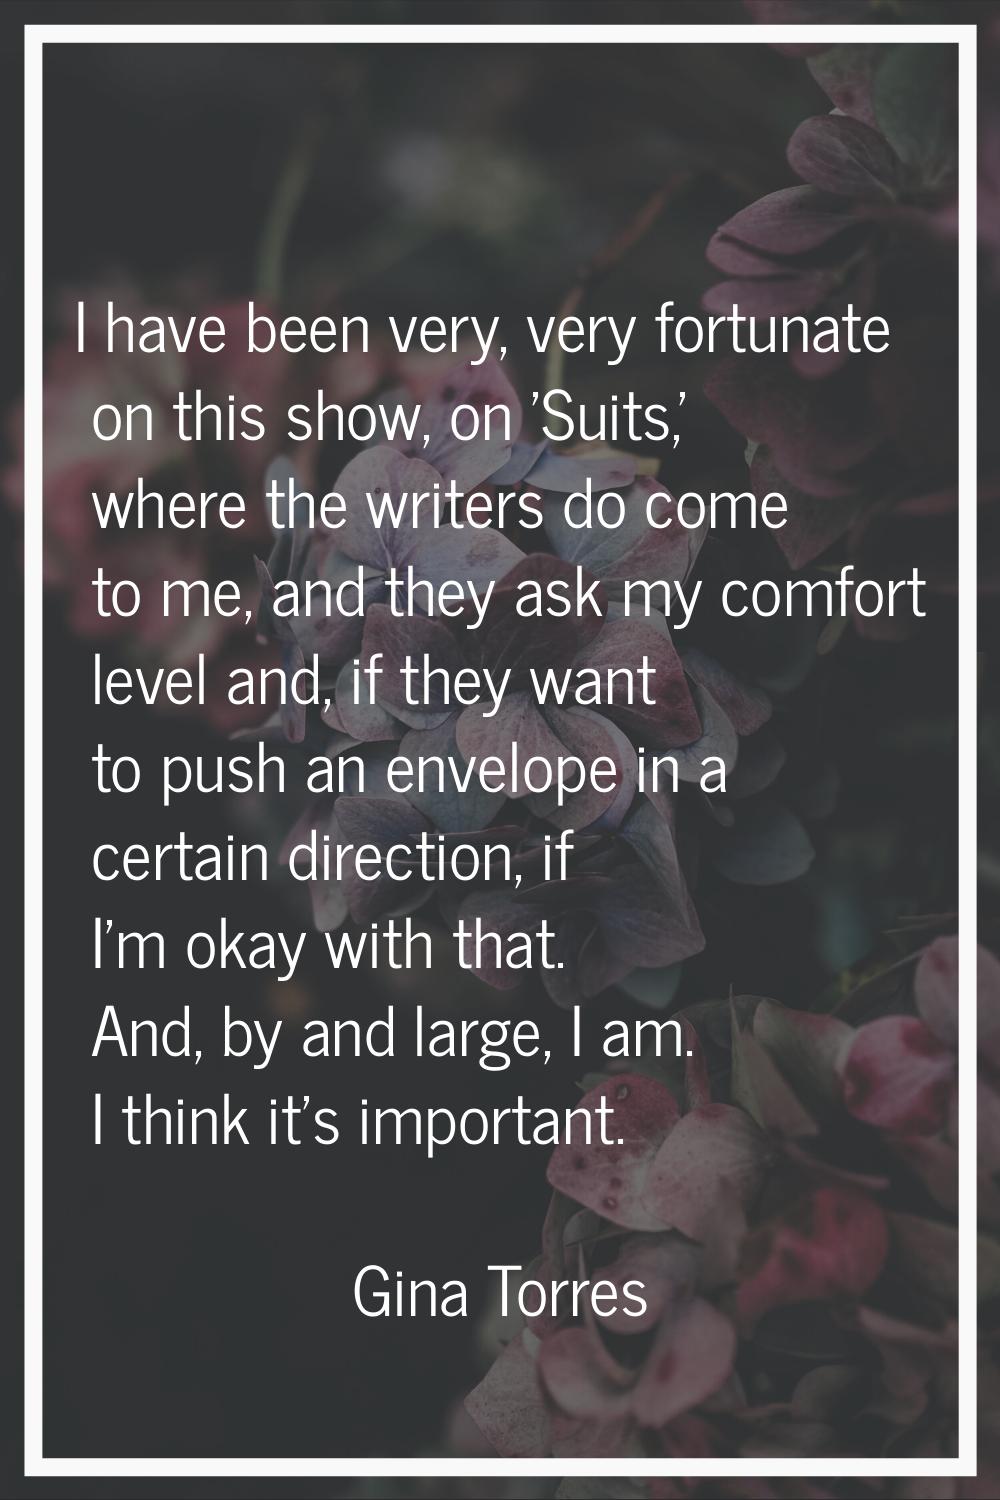 I have been very, very fortunate on this show, on 'Suits,' where the writers do come to me, and the